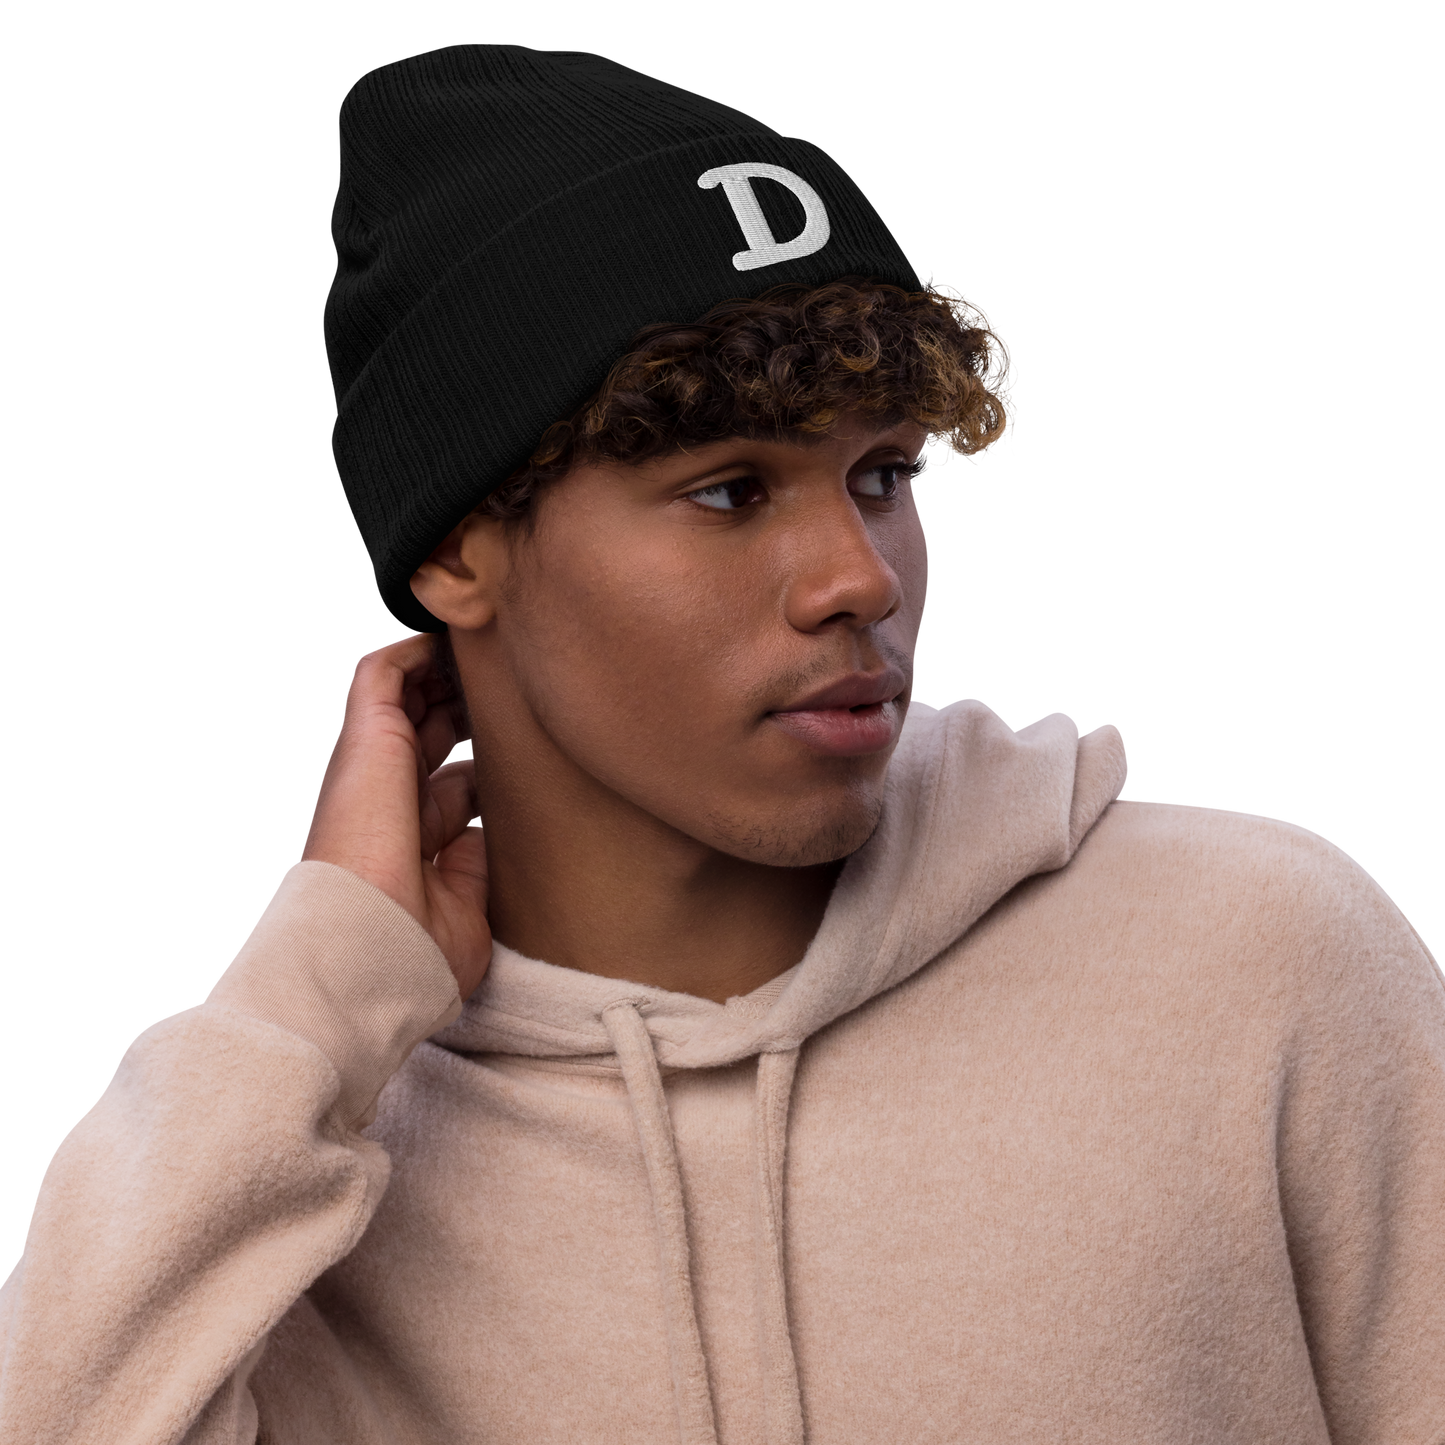 Detroit 'Old French D' Ribbed Beanie